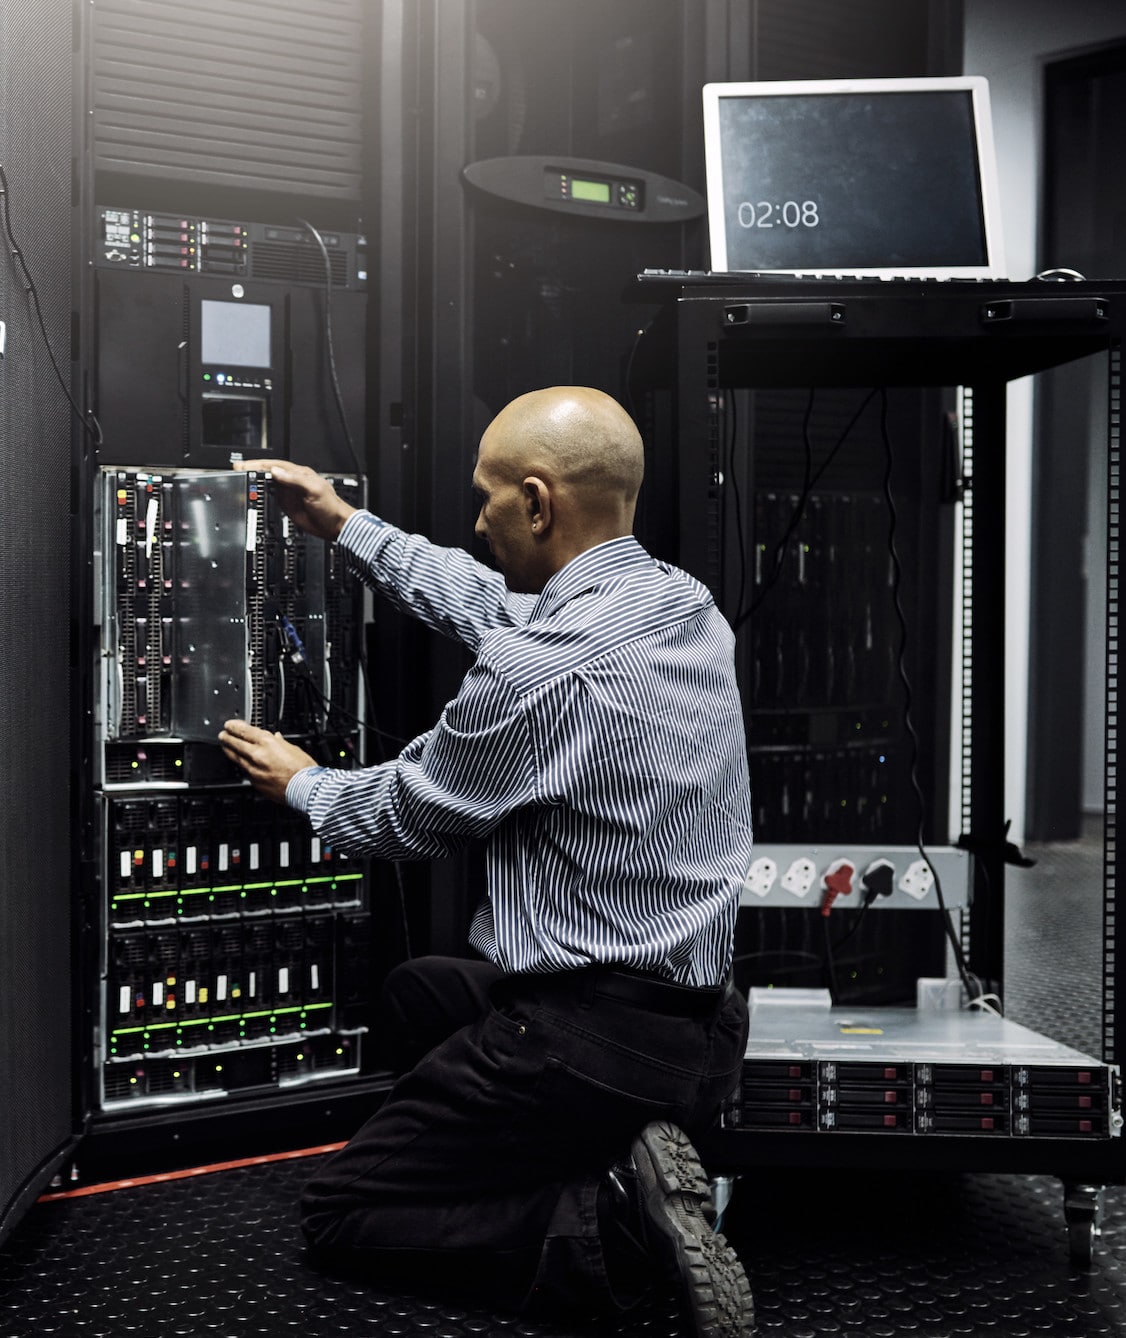 What Can You Expect From Our Network Performance Services?